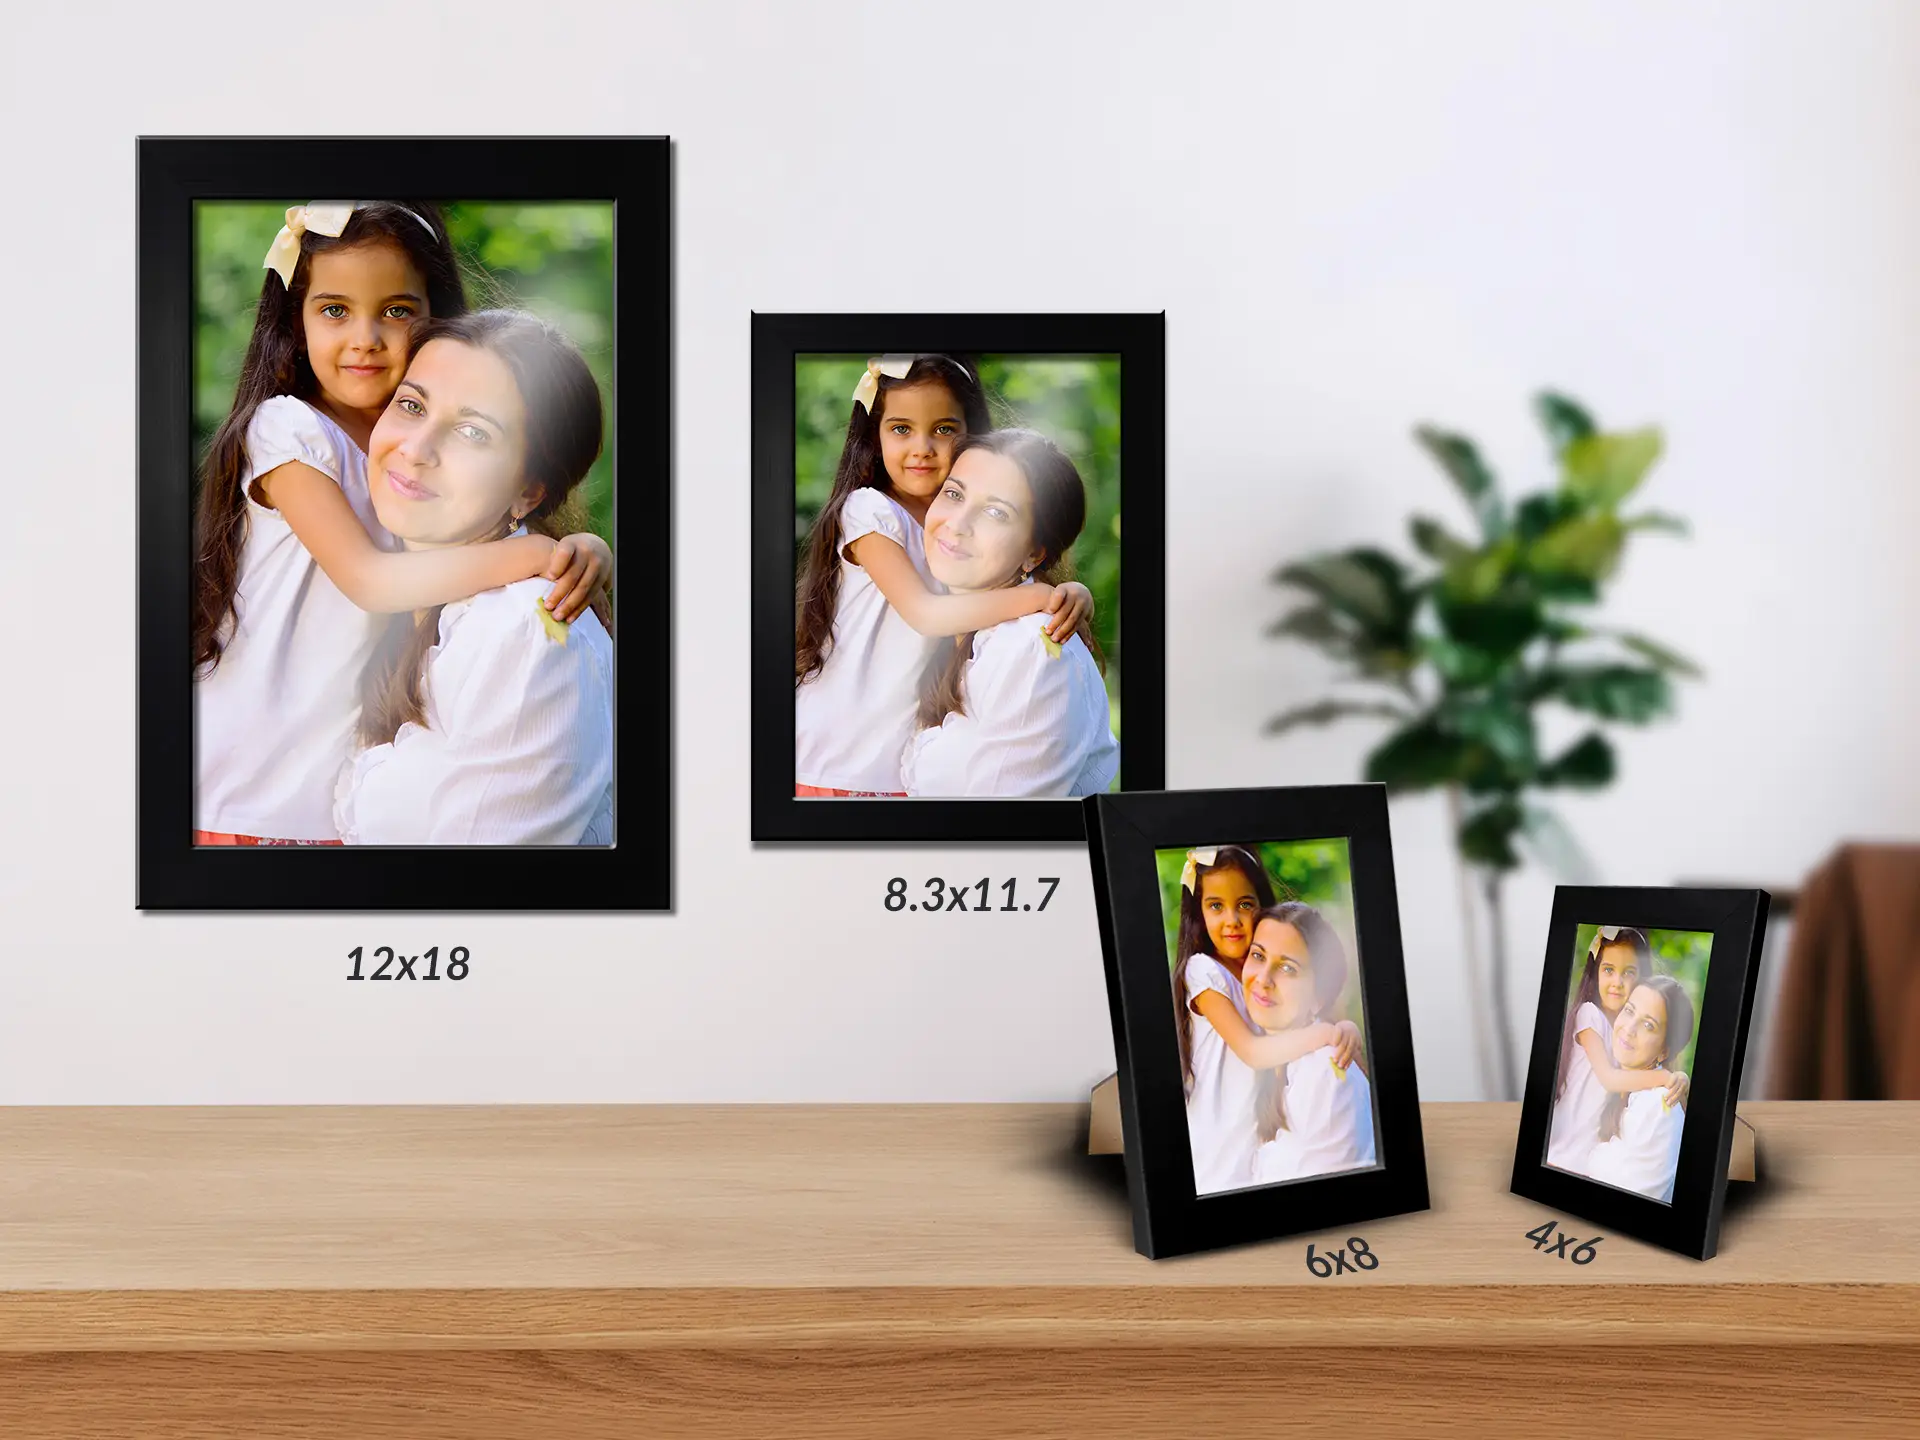 Personalized Frame Sizes